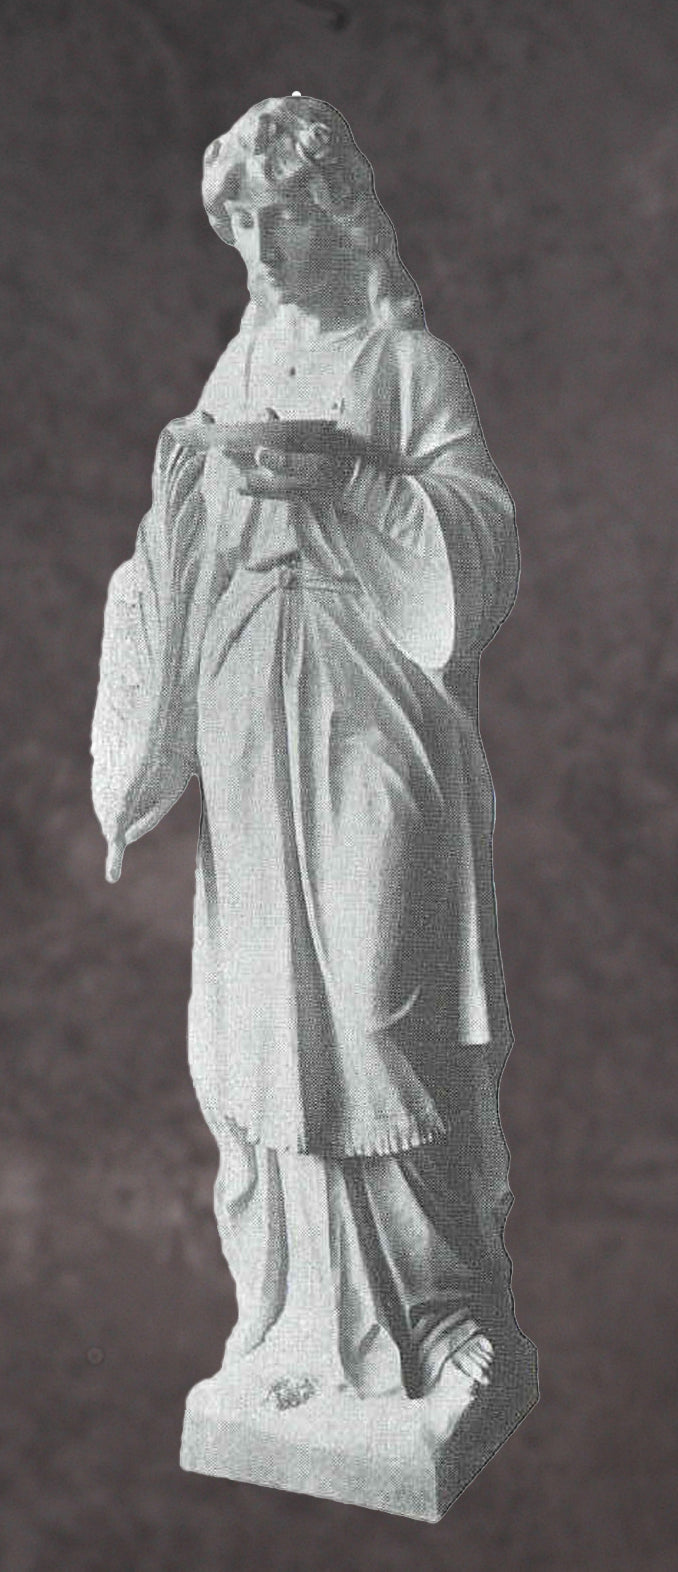 Saint Lucy Marble Statue - 72”H